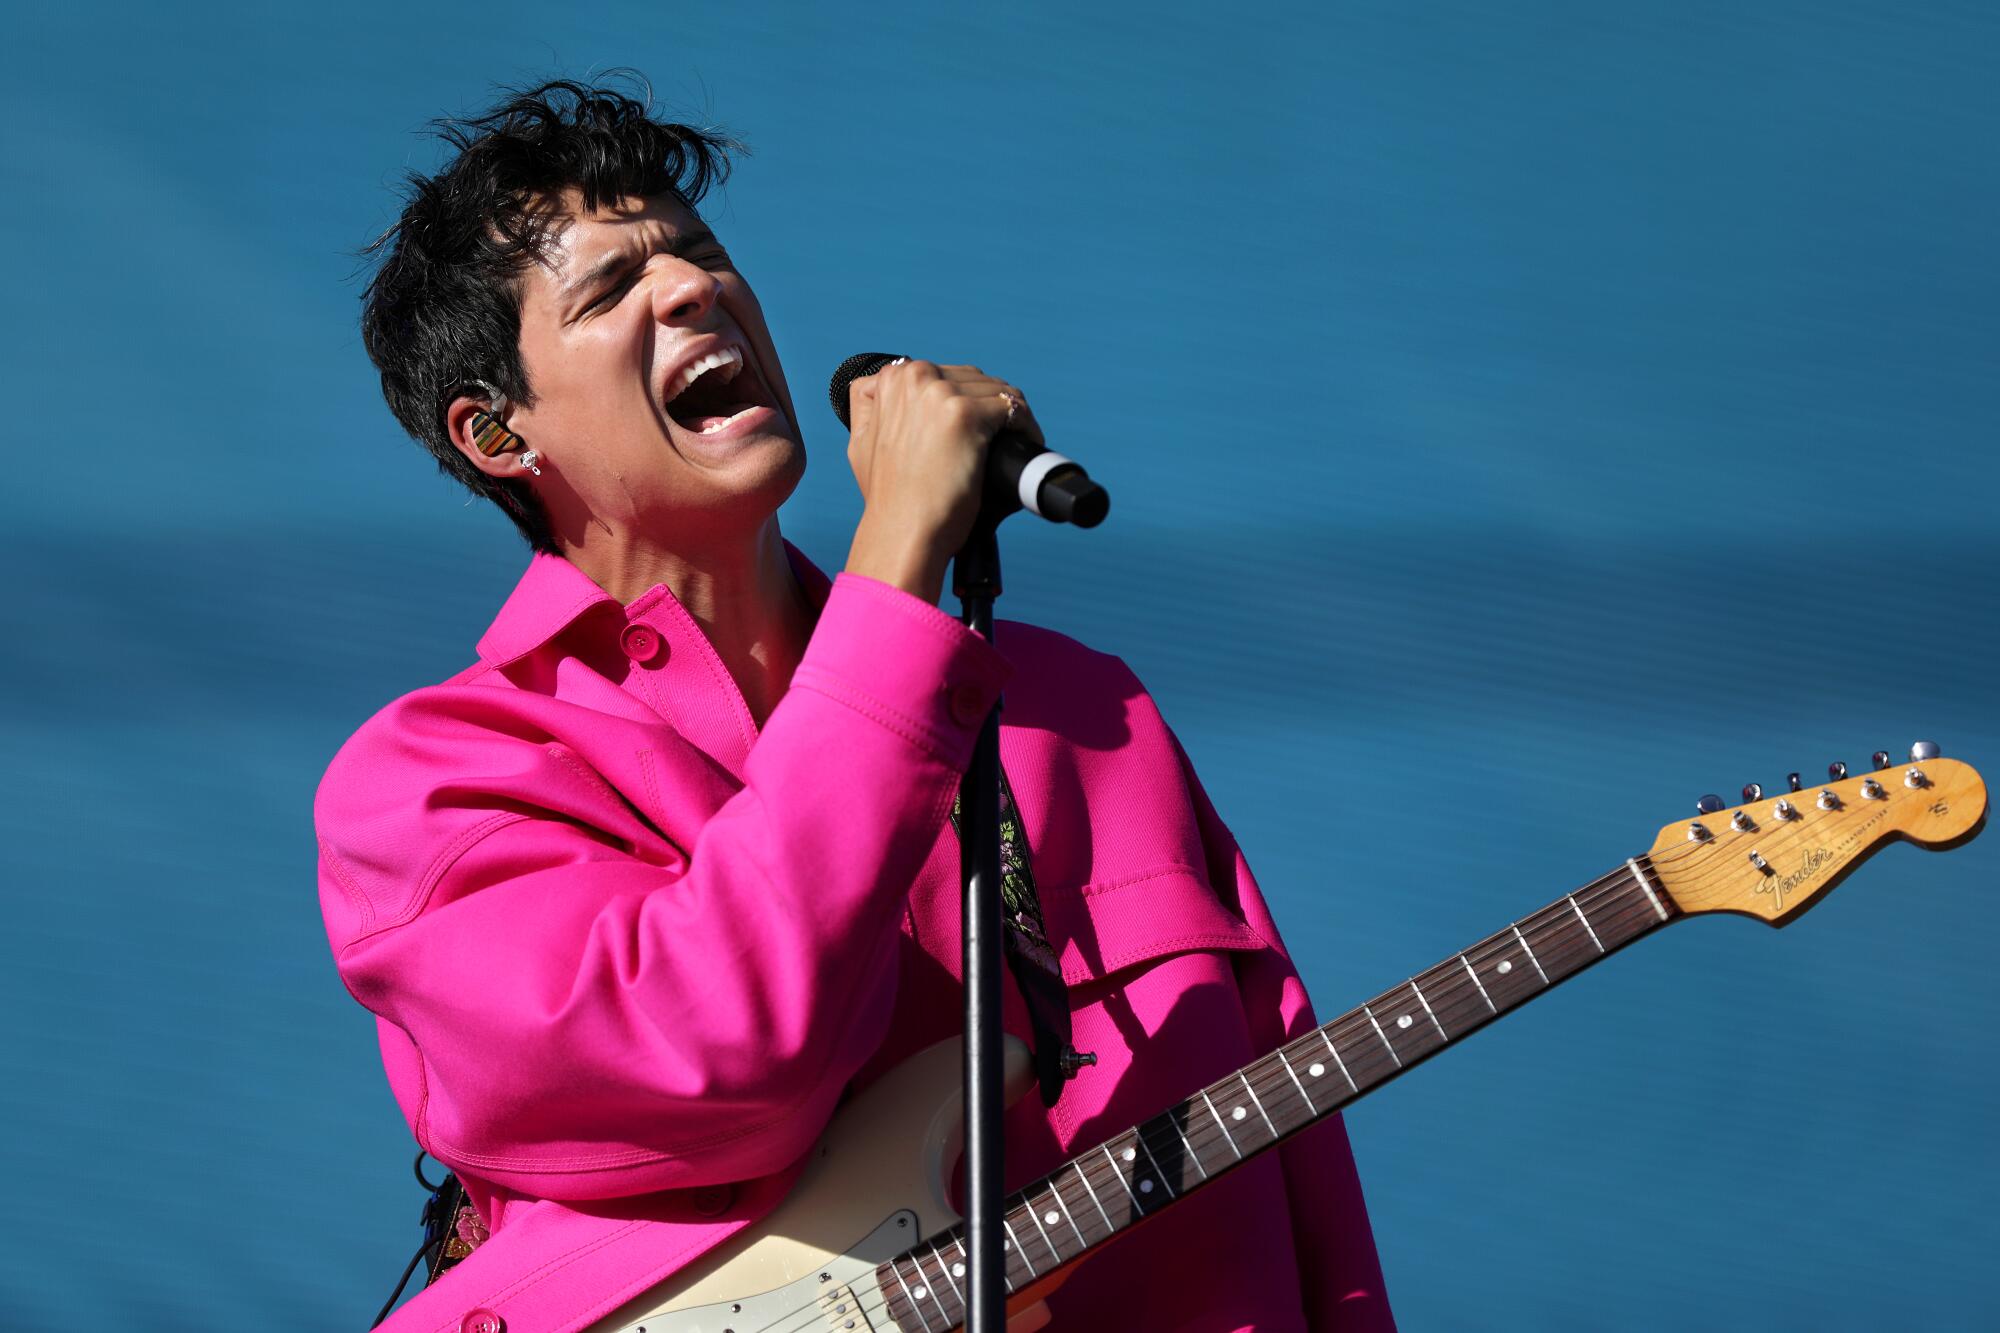 Omar Apollo performs wearing a bright pink shirt.